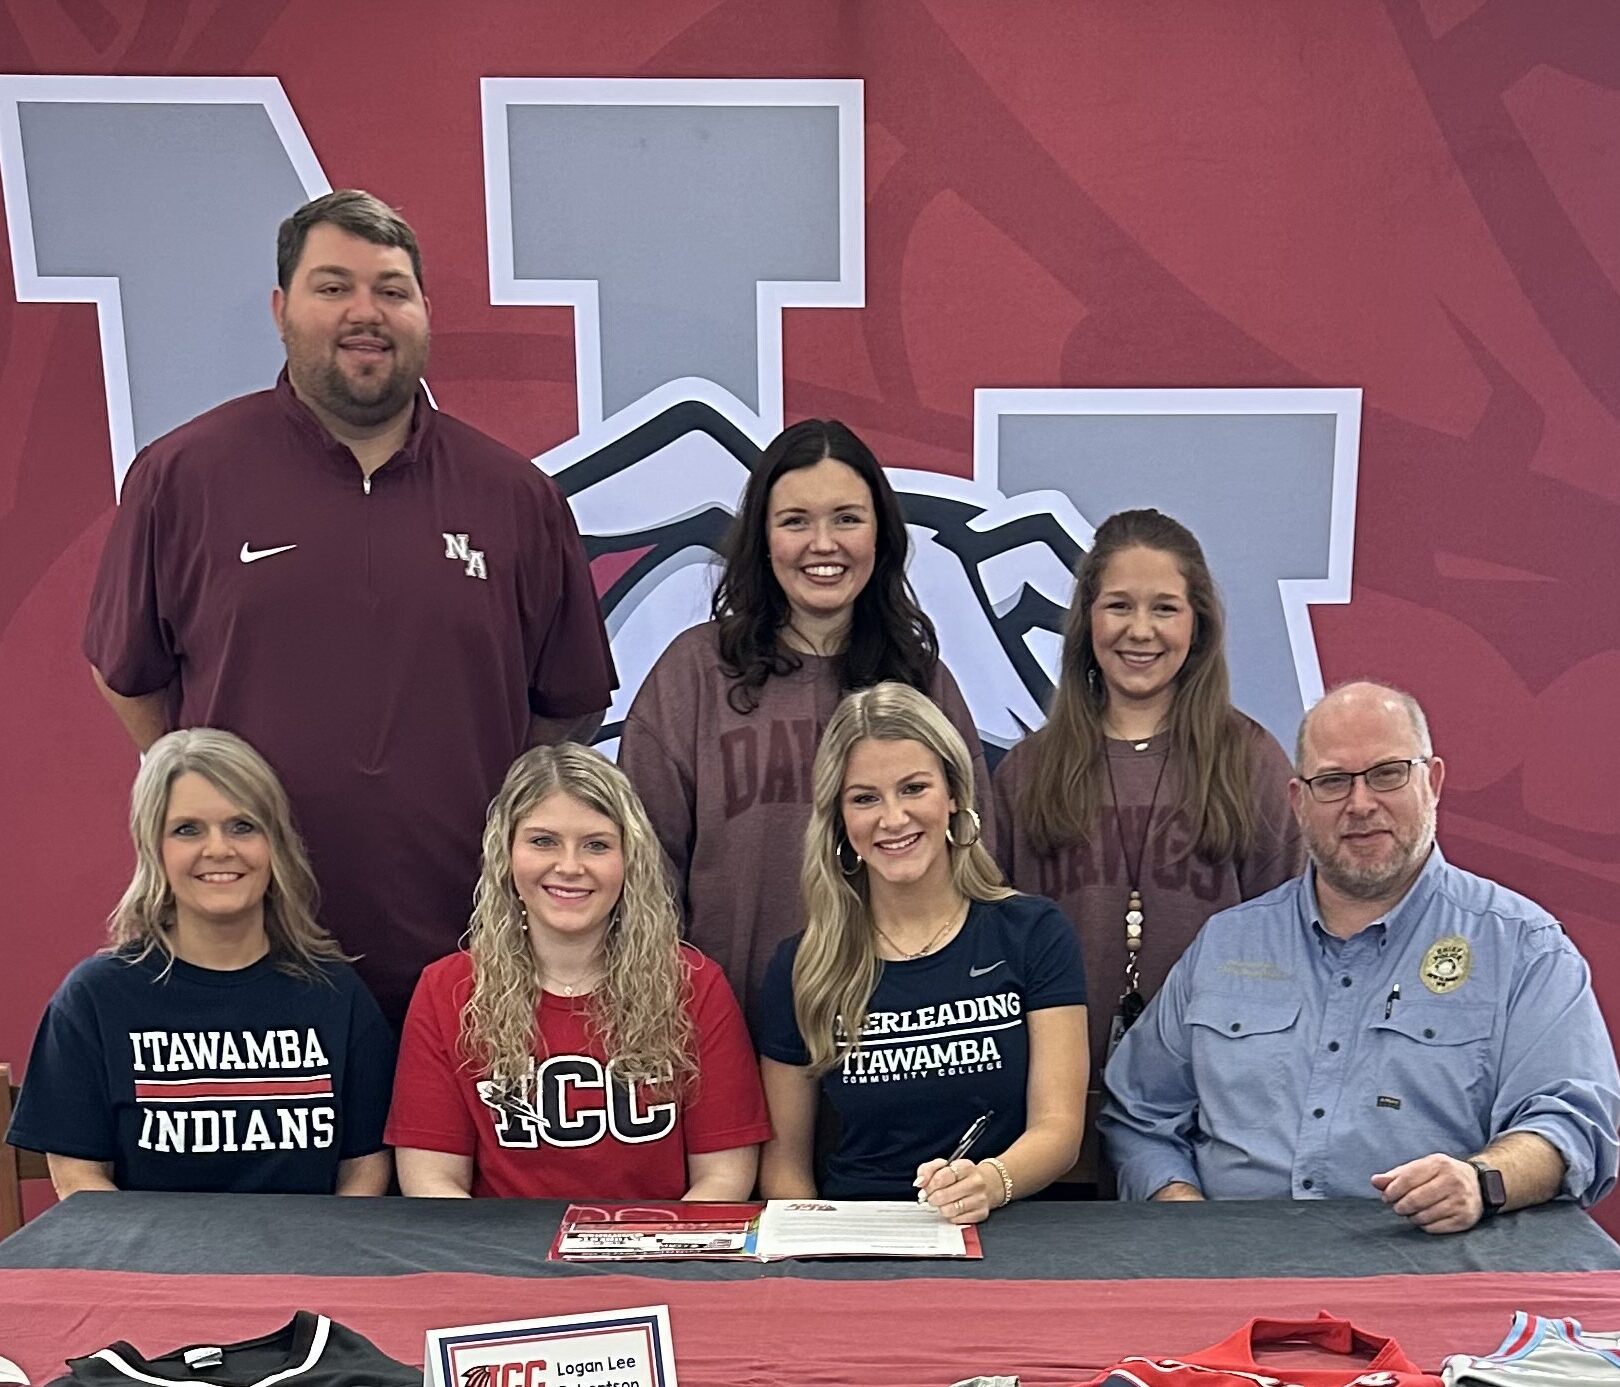 New Albany High School senior cheerleader Logan Lee Robertson was surrounded by friends and family as she signed with Itawamba Community College Cheer on Friday, January 26, 2024. Pictured are front row l-r: Neely Robertson, Bailey Robertson, Logan Lee Robertson, Chris Robertson; back row l-r: NAHS Athletic Director Cody Stubblefield, NAHS Cheer Coach Allie Pierce, and NAHS Cheer Coach Mary Scott Sanks.